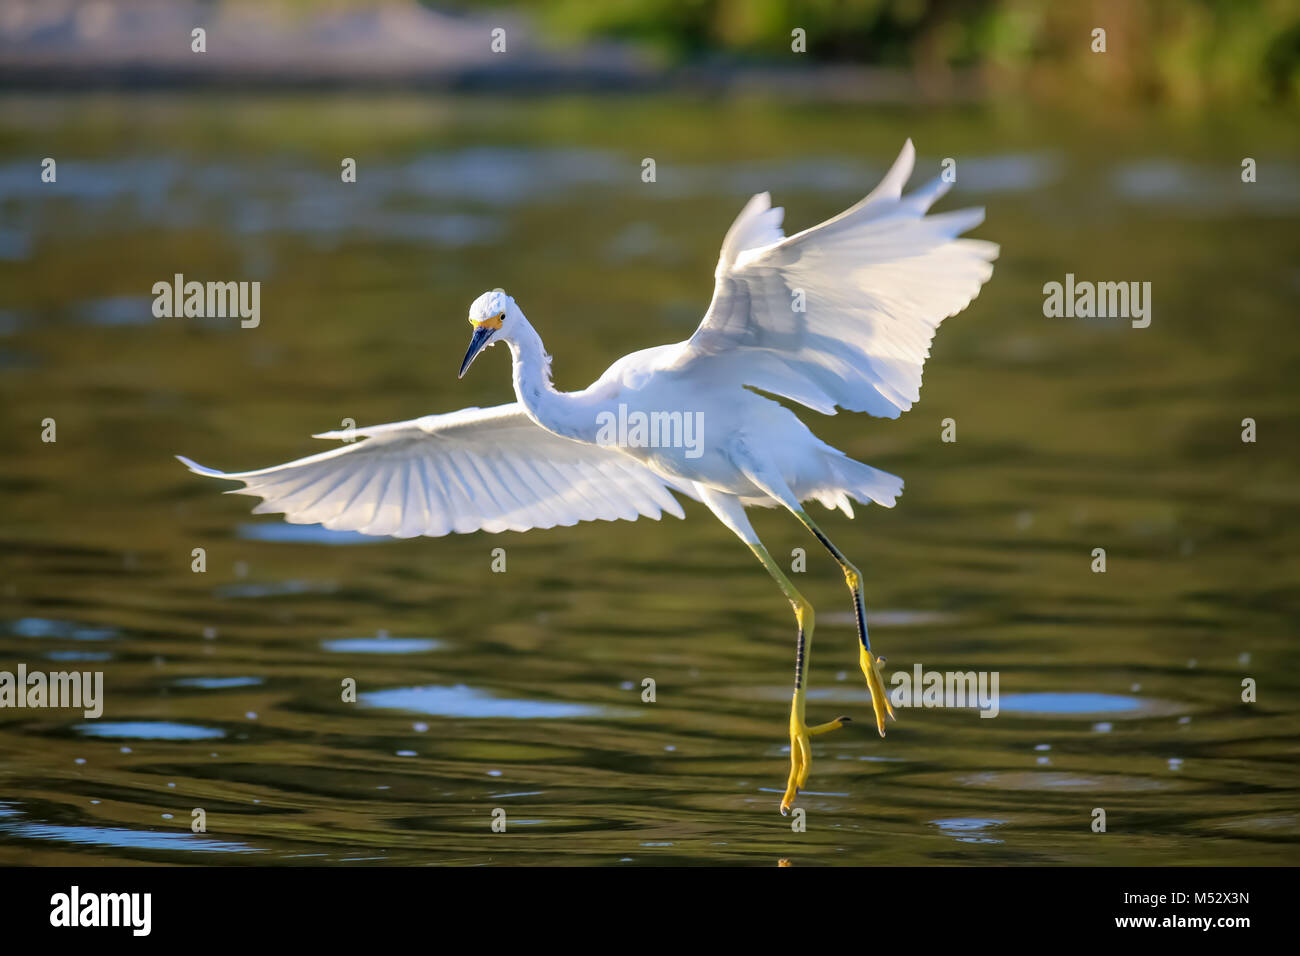 The Snowy Egret is Flying at Malibu Lagoon Stock Photo